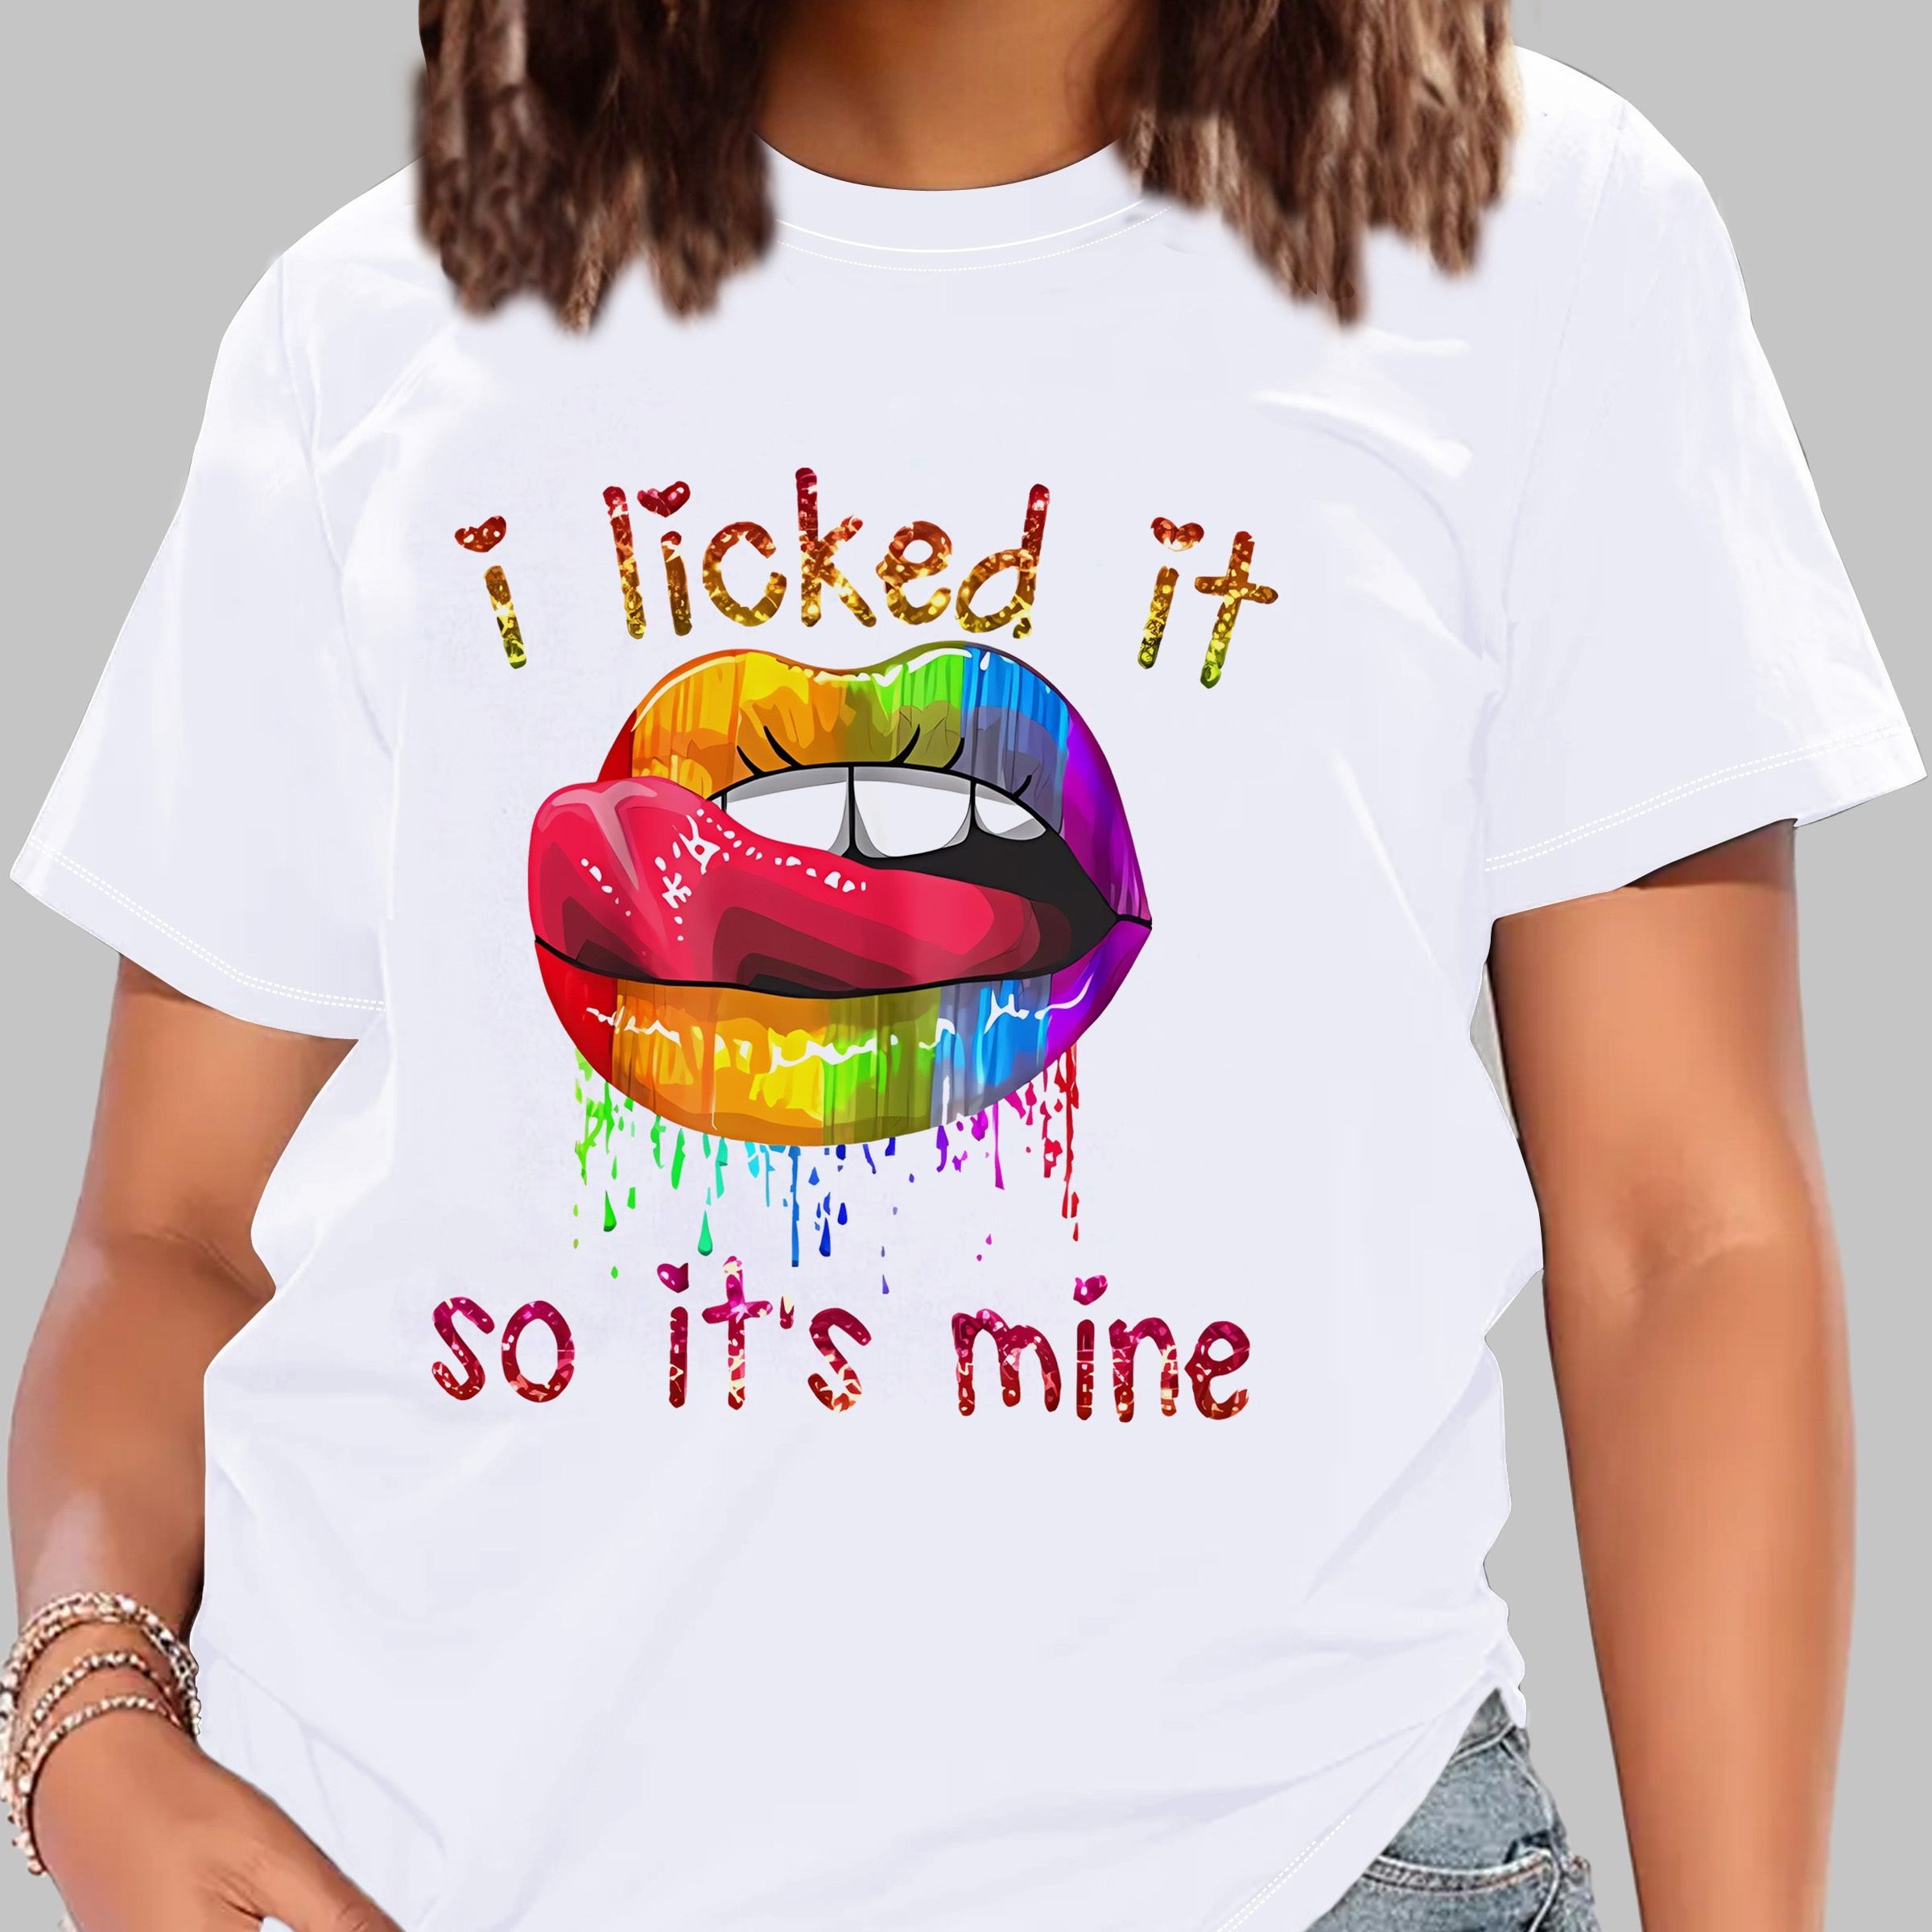 

Colorful Lips Print T-shirt, Crew Neck Short Sleeve T-shirt, Casual Sport Tops, Women's Clothing